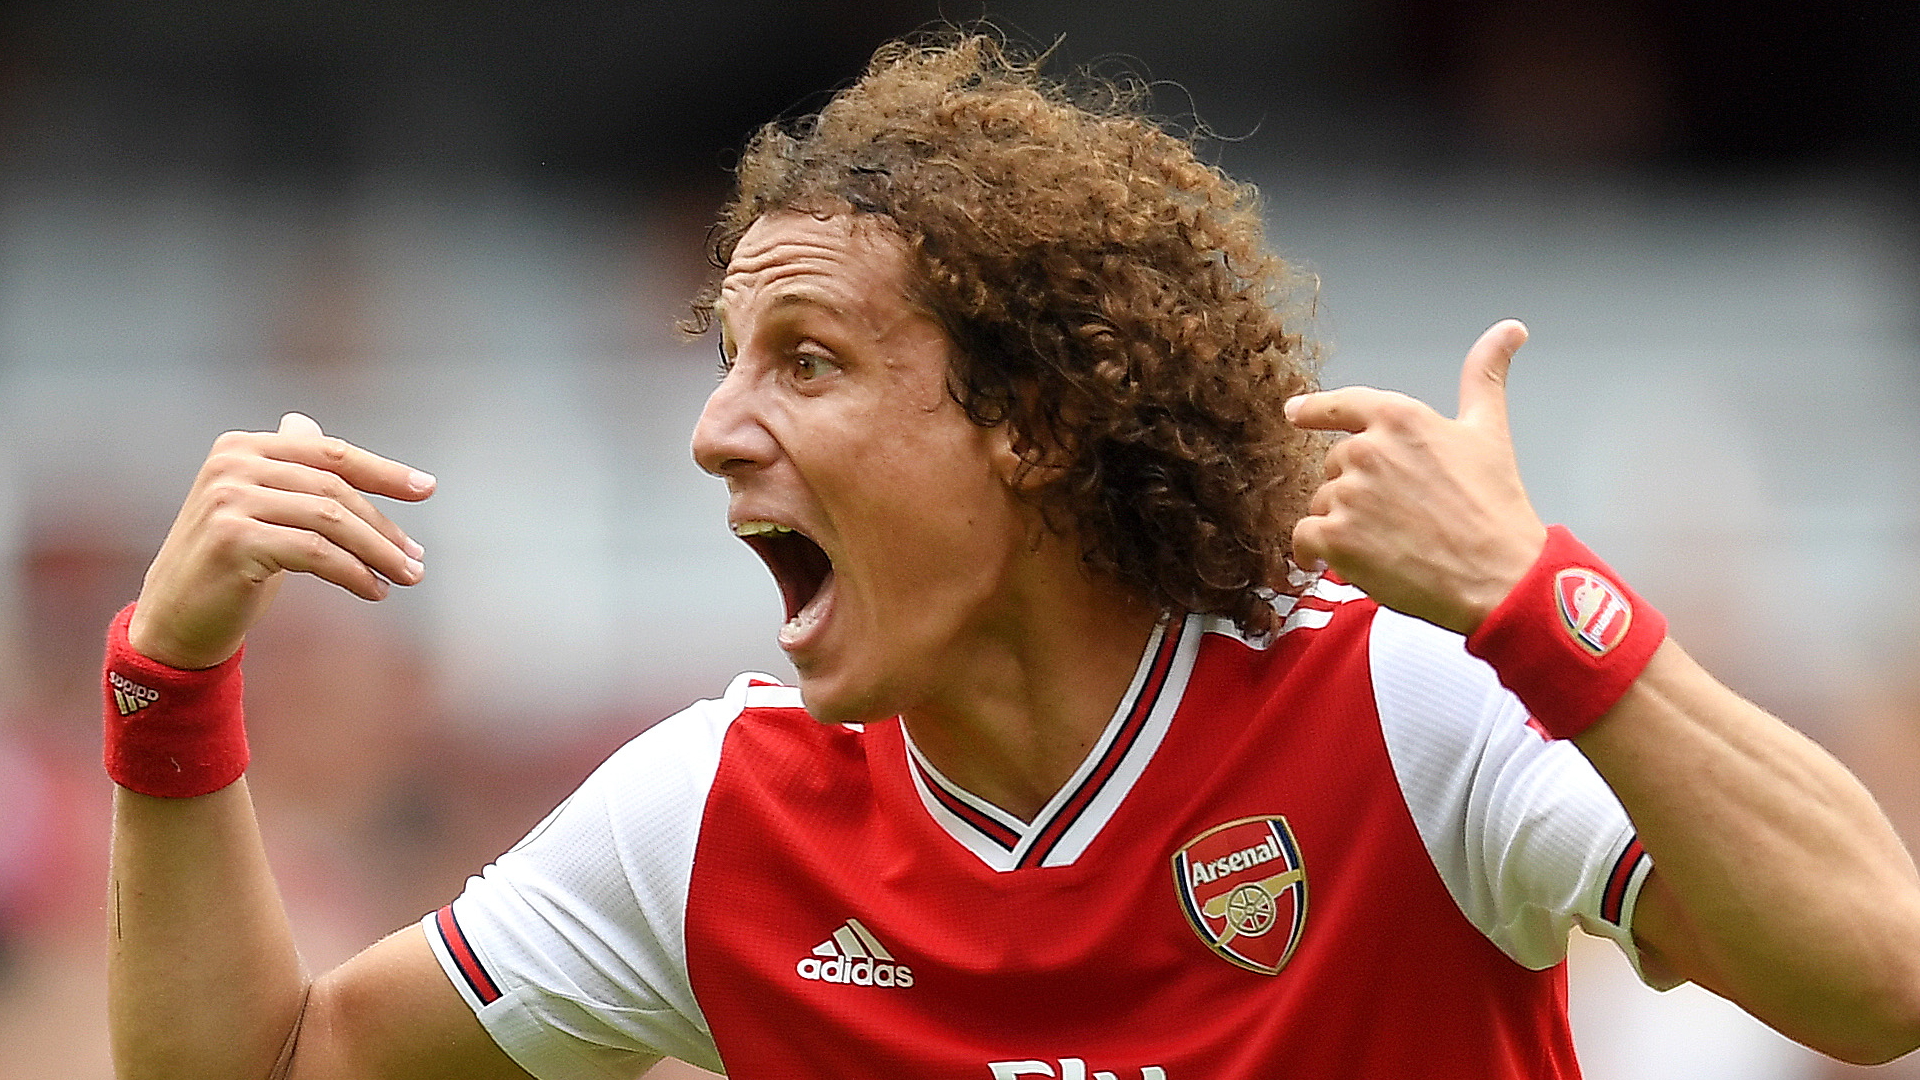 ‘I can’t be a coach with this hair!’ – Arsenal star David Luiz will have a trim if he becomes a boss